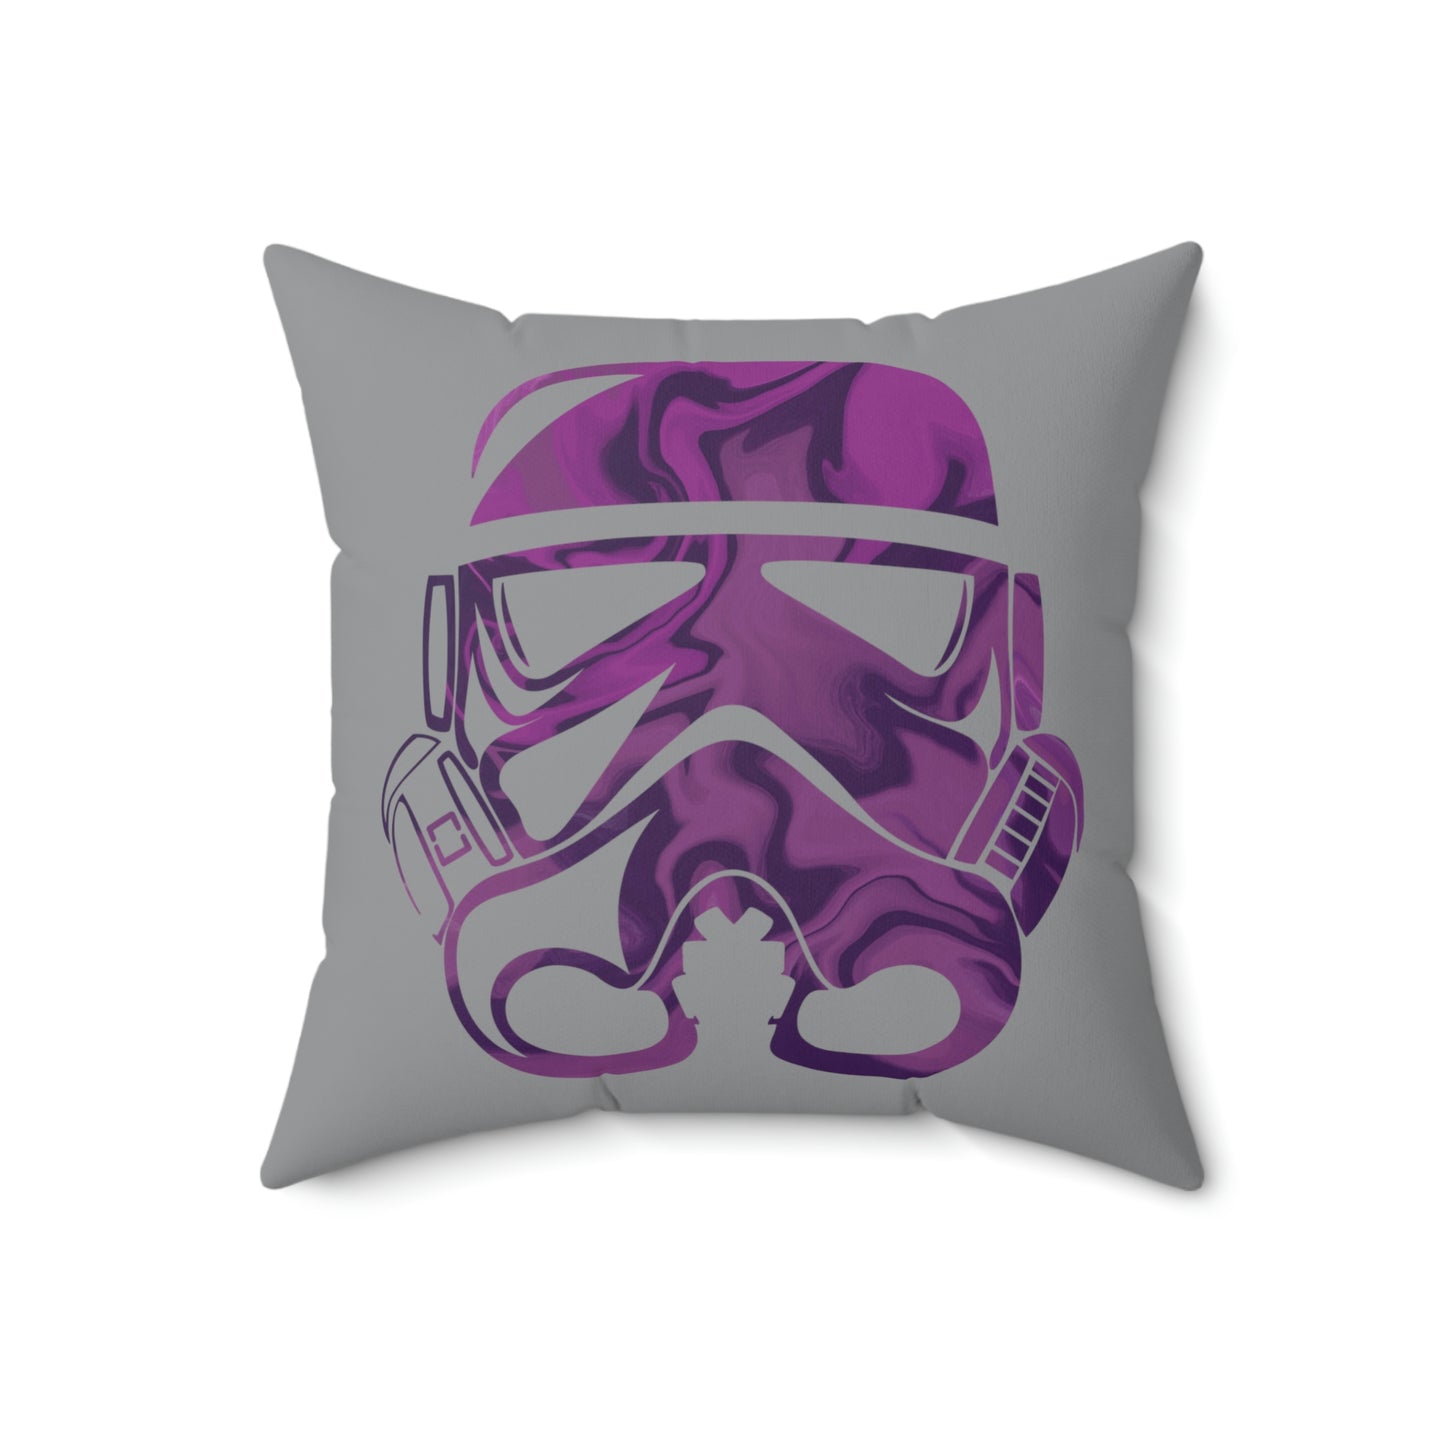 Spun Polyester Square Pillow Case ”Storm Trooper 4 on Gray”